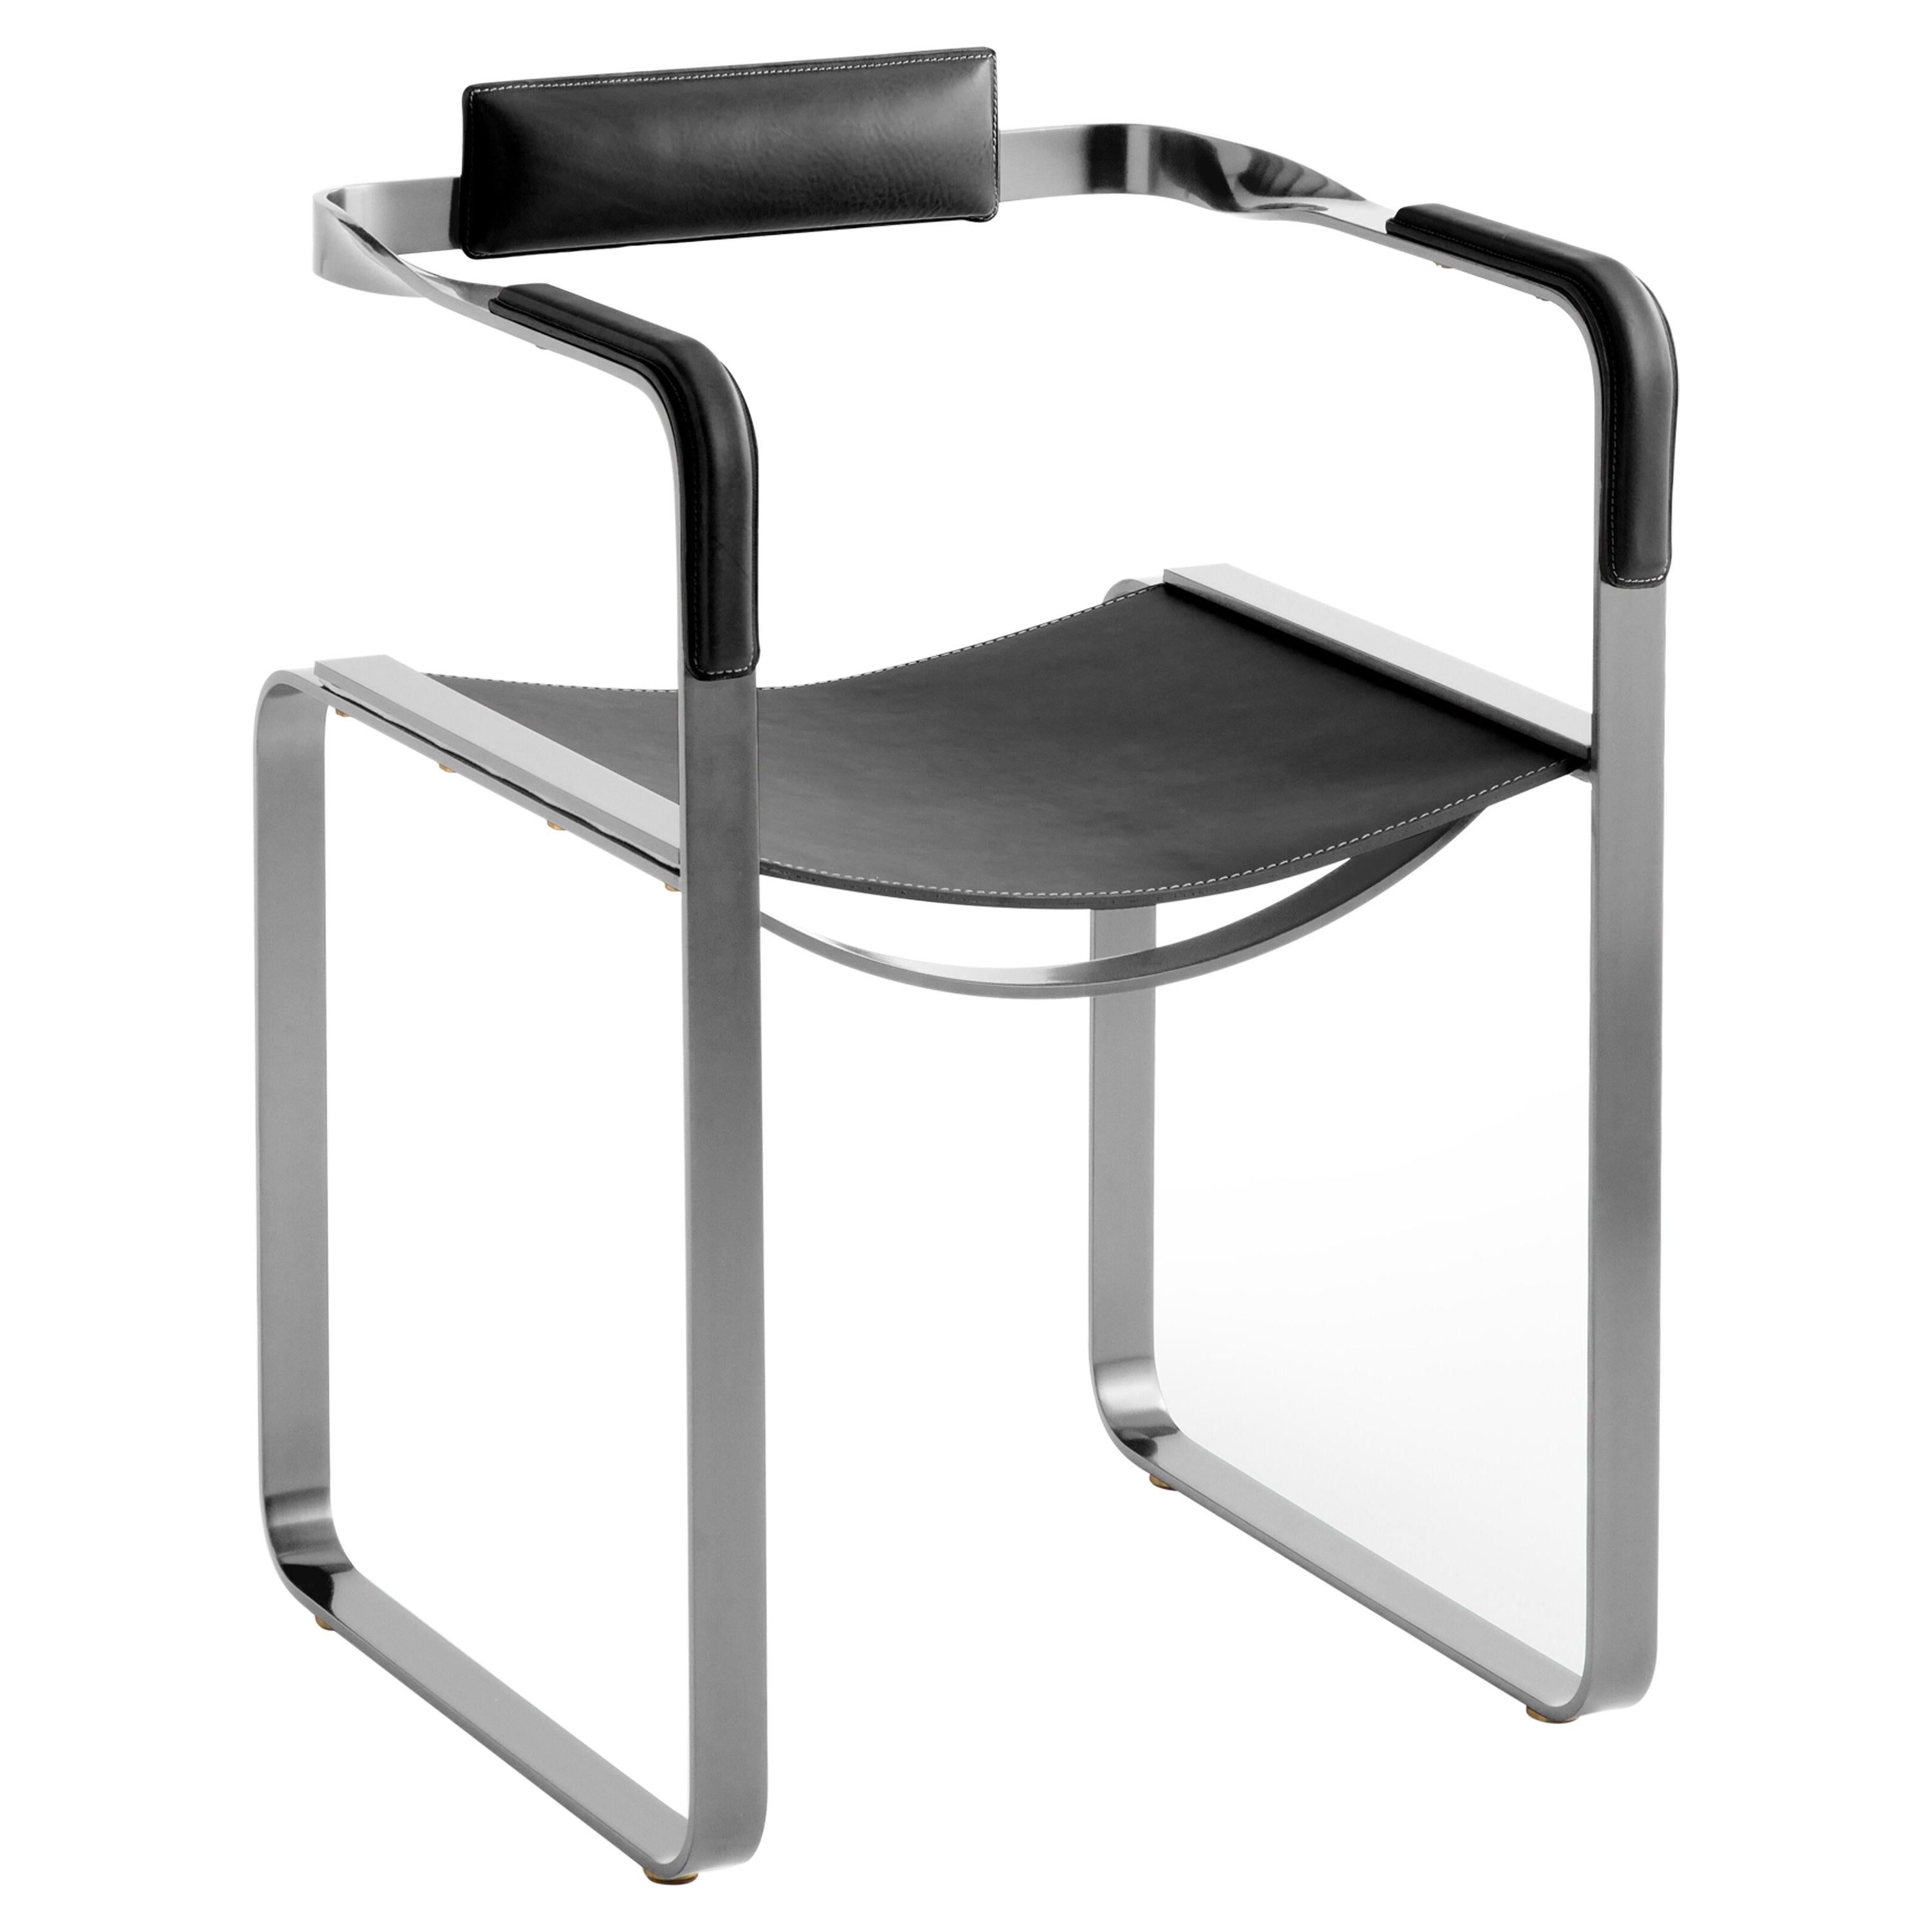 Armchair, Old Silver Steel and Black Saddle Leather, Contemporary Style